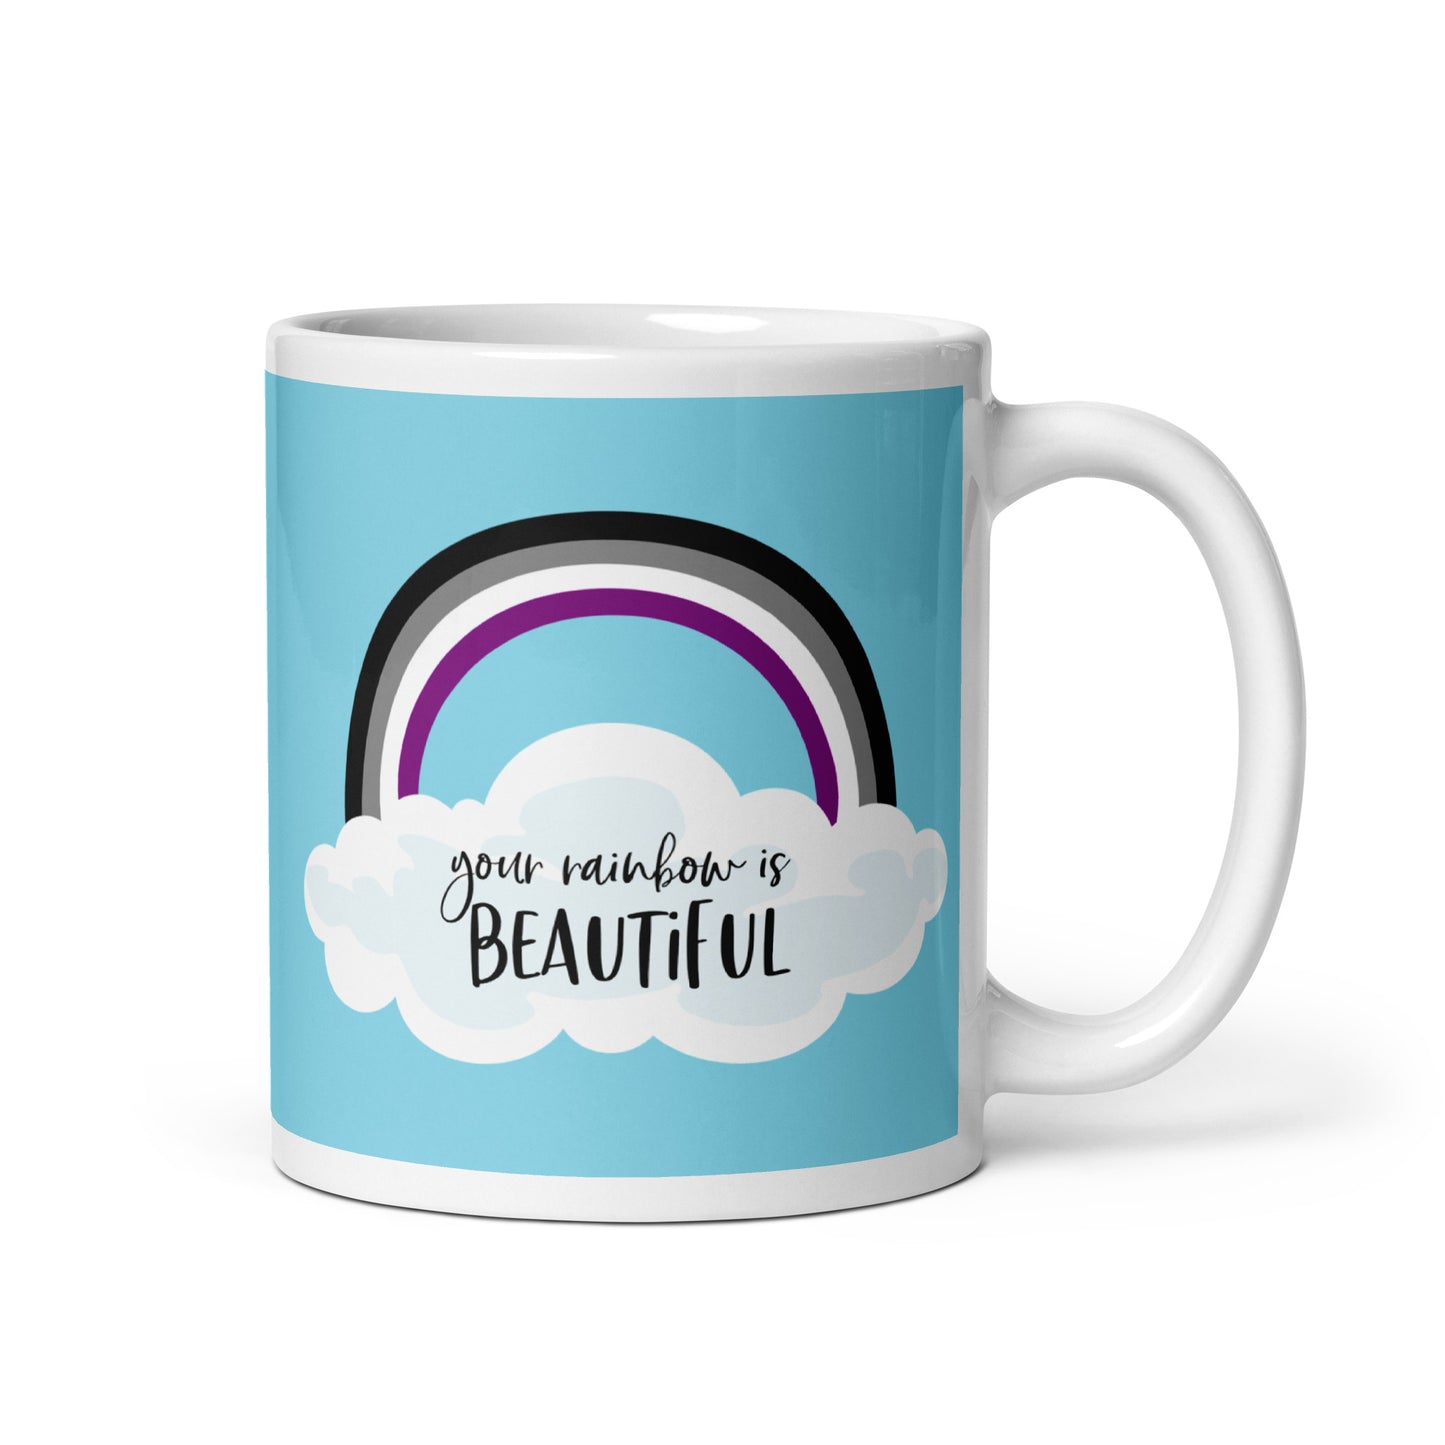 Asexual Pride Rainbow Mug with Optional Personalization